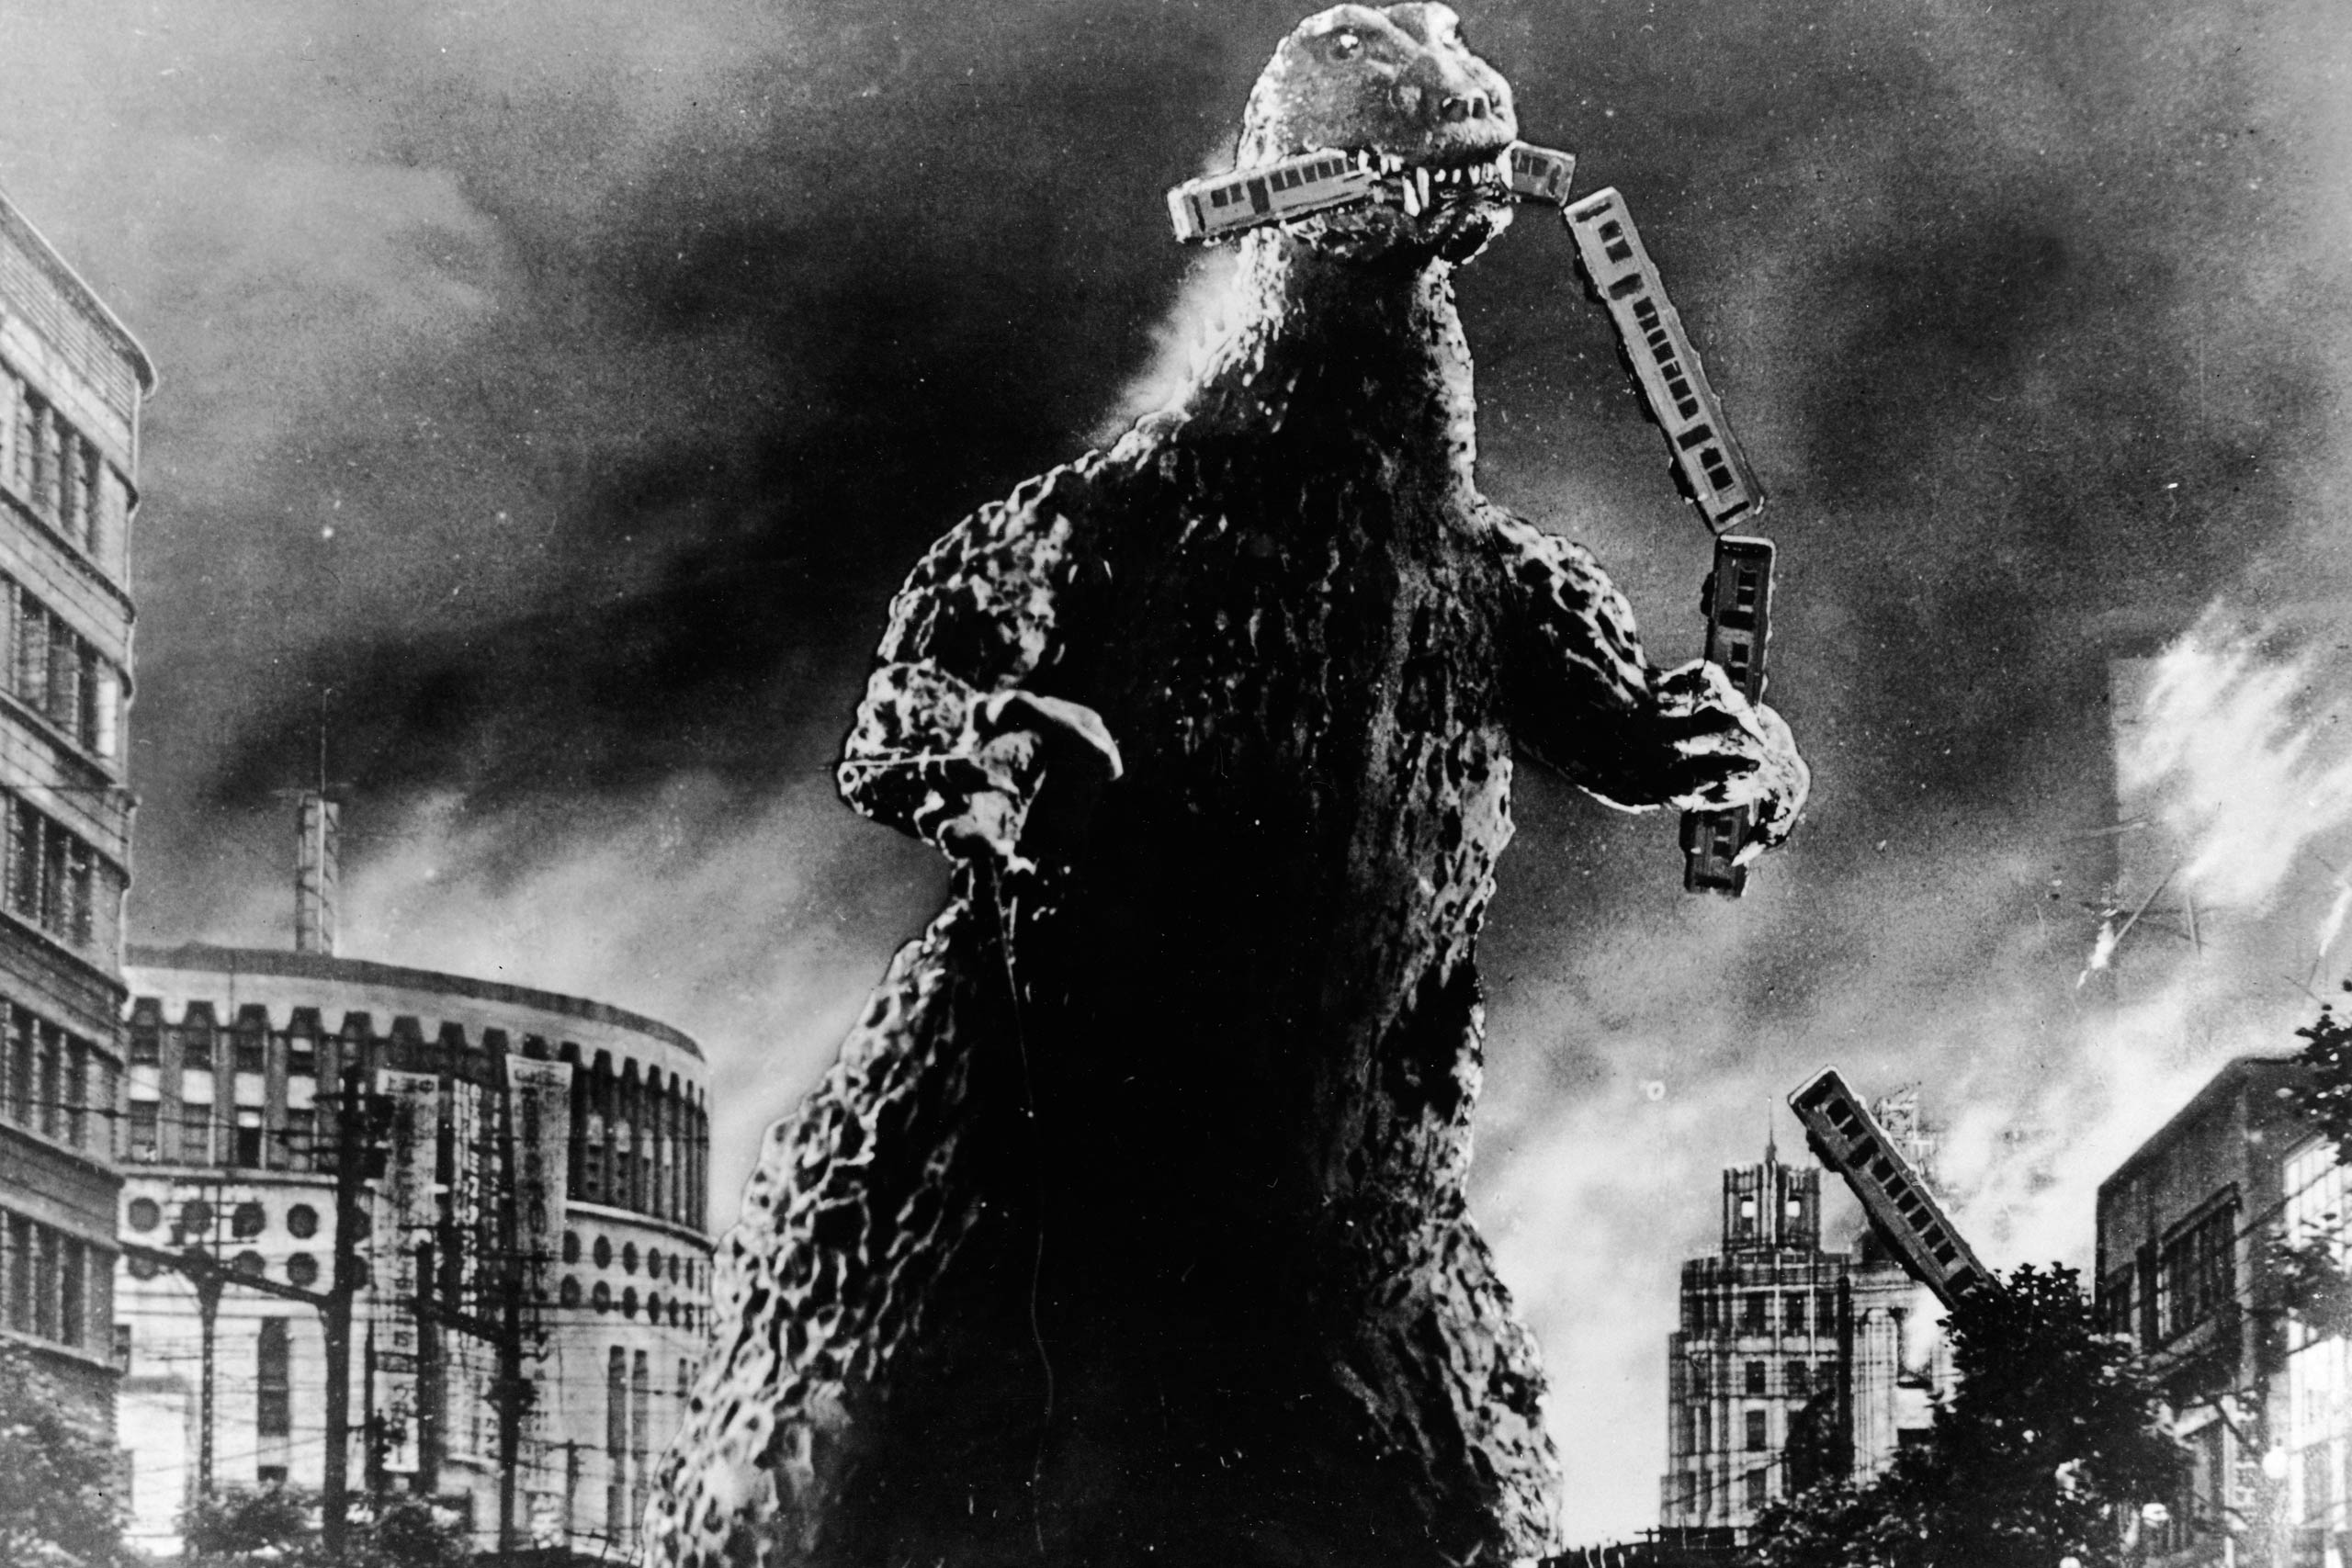 Godzilla is seen in a scene from <i>Godzilla, King of the Monsters!</i>, 1956. (Embassy Pictures/Getty Images)